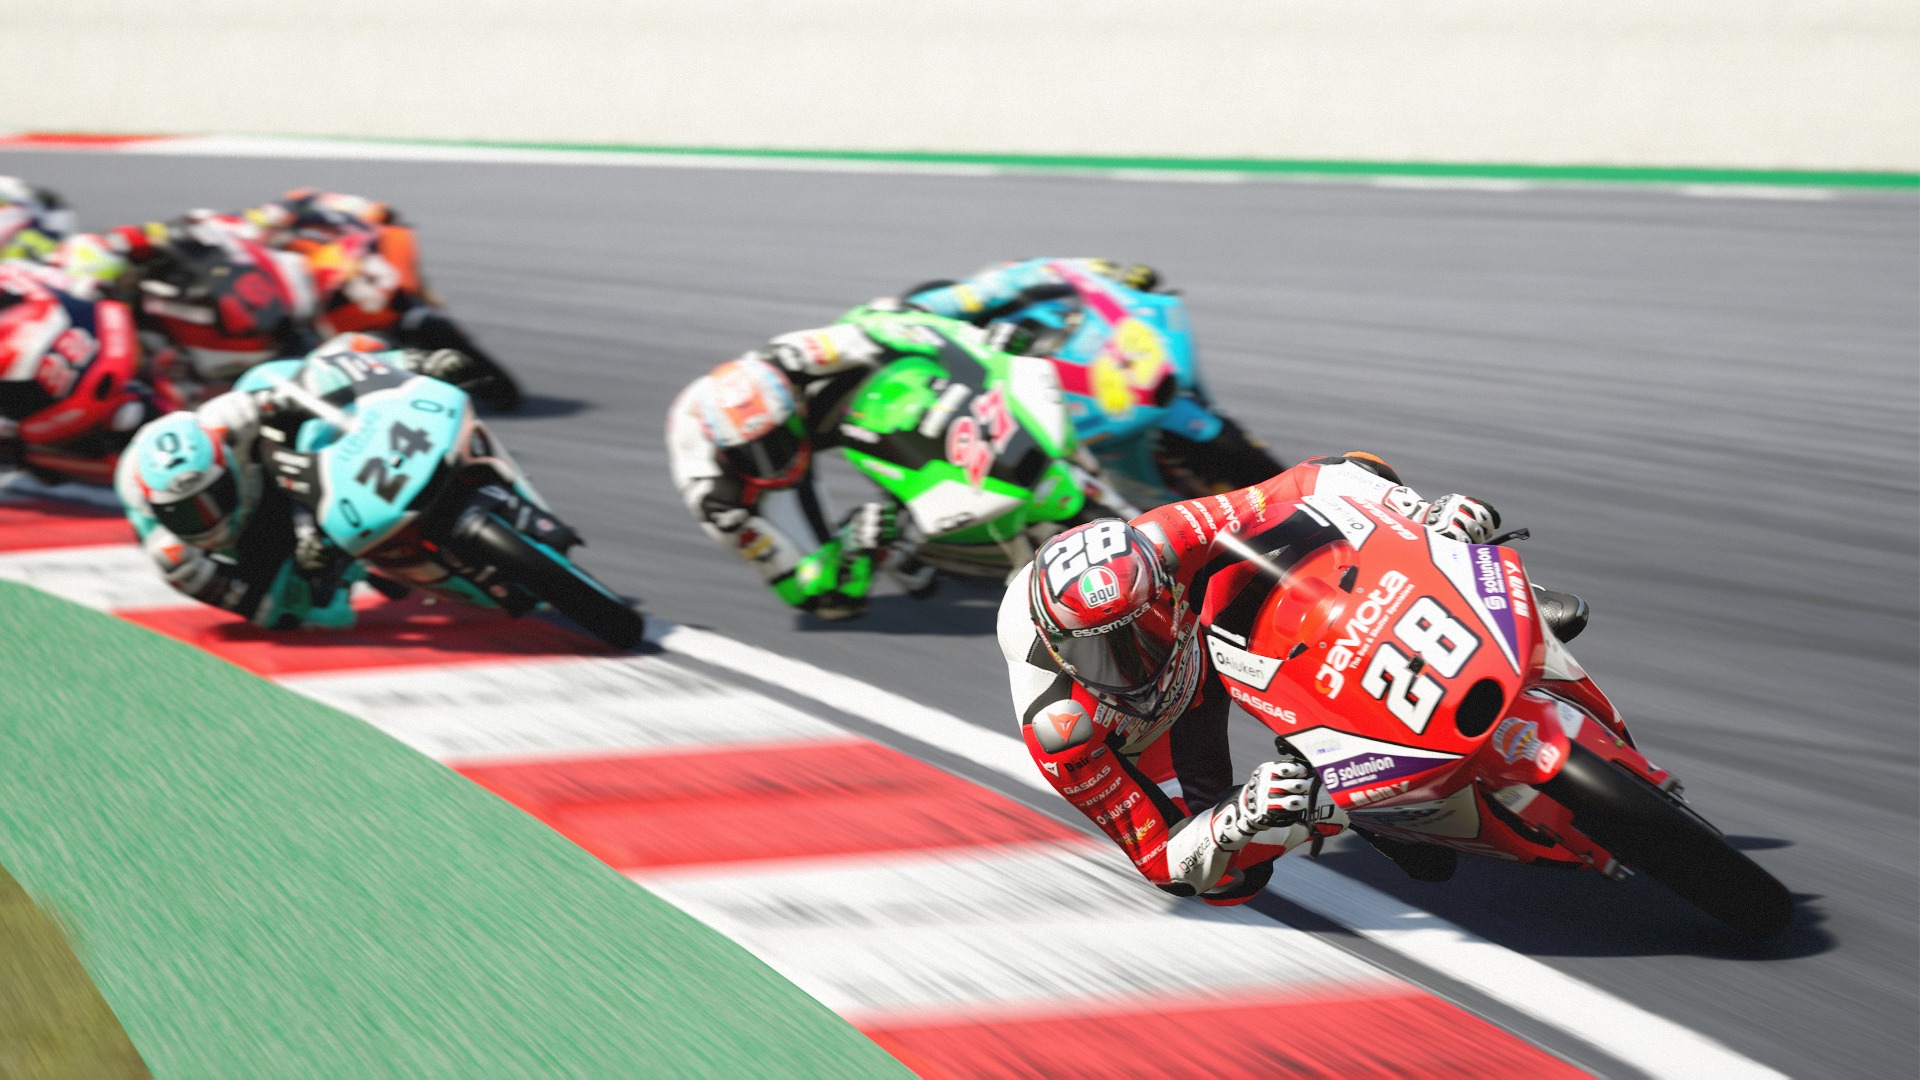 MotoGP 22 Update Adds Updated Moto3, Red Bull Rookies Cup and More